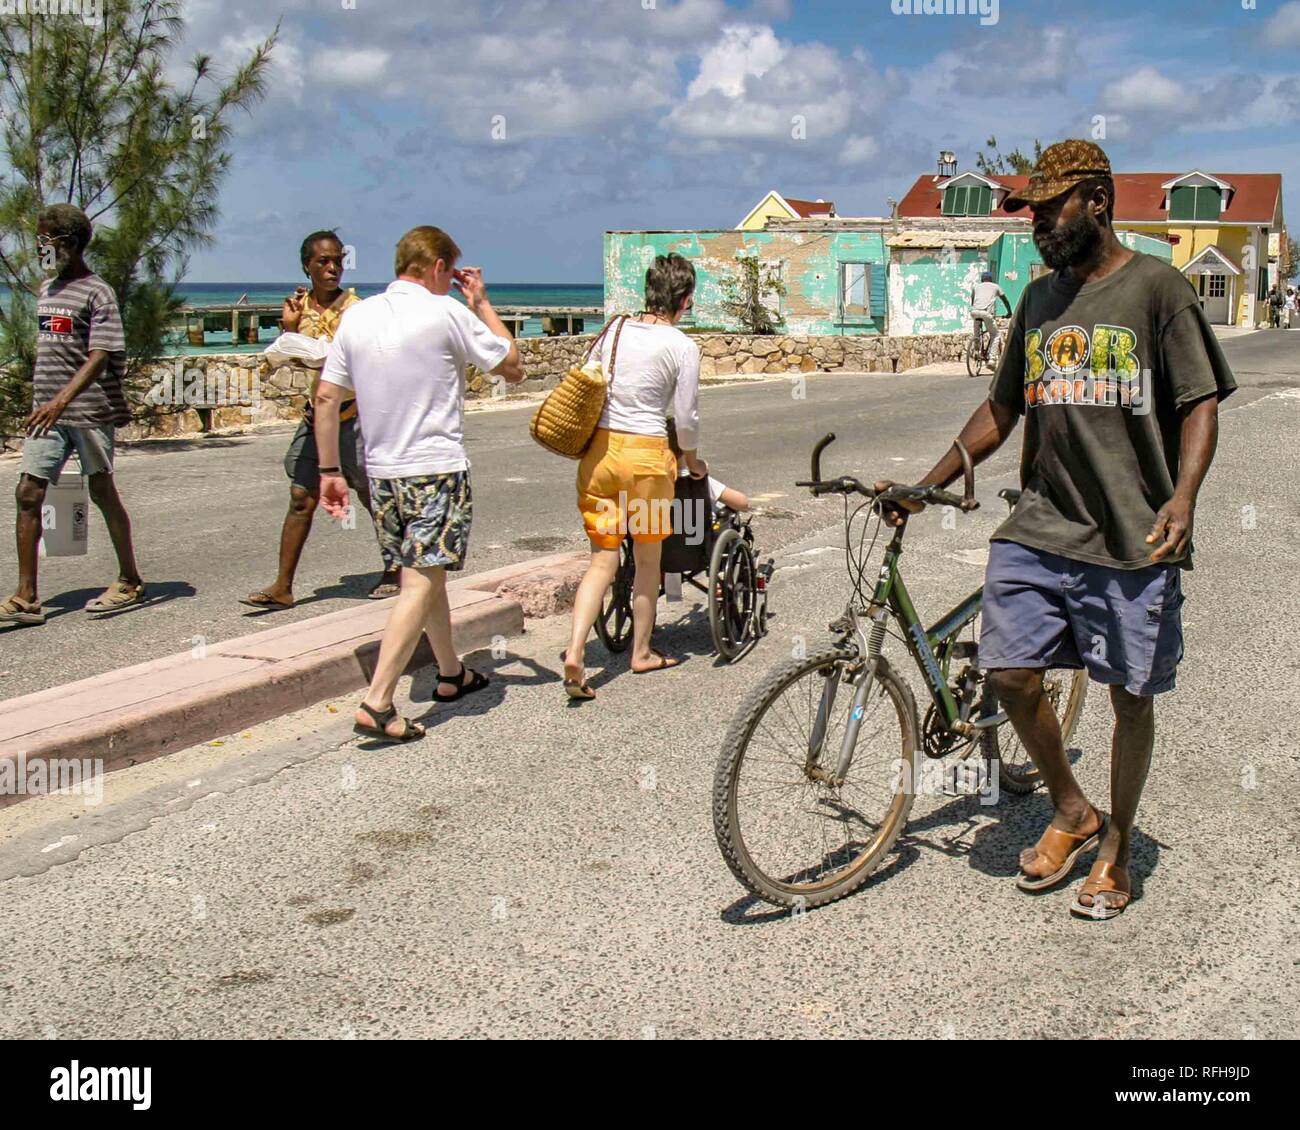 March 27, 2005 - Grand Turk Island, Turks & Caicos - A Grand Turk Island  man walks his bicycle past two tourists and some islanders on the  waterfront. The capital island of